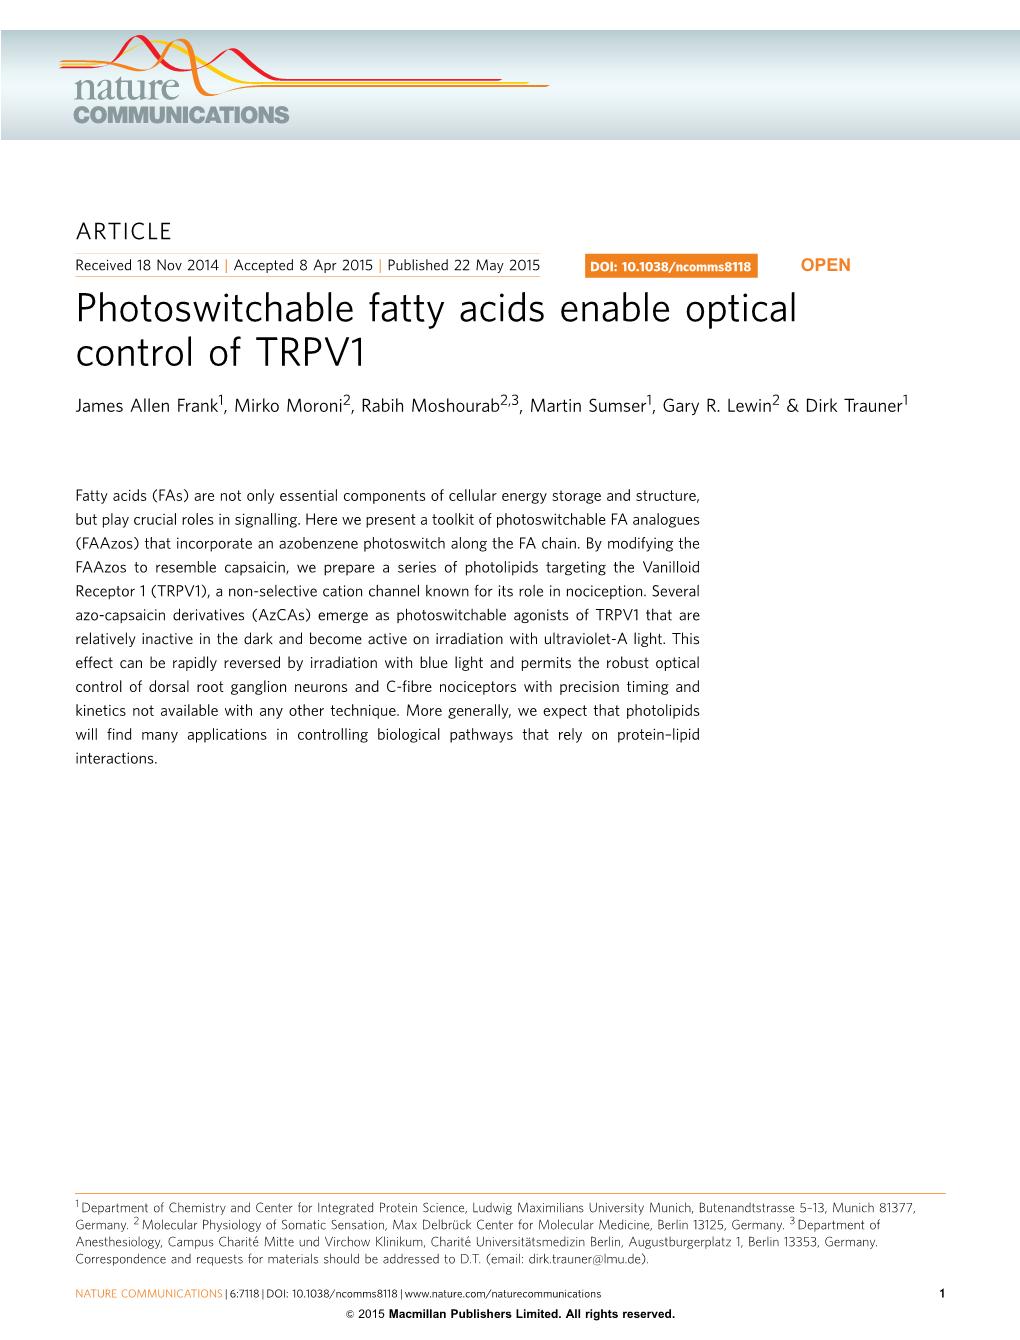 Photoswitchable Fatty Acids Enable Optical Control of TRPV1